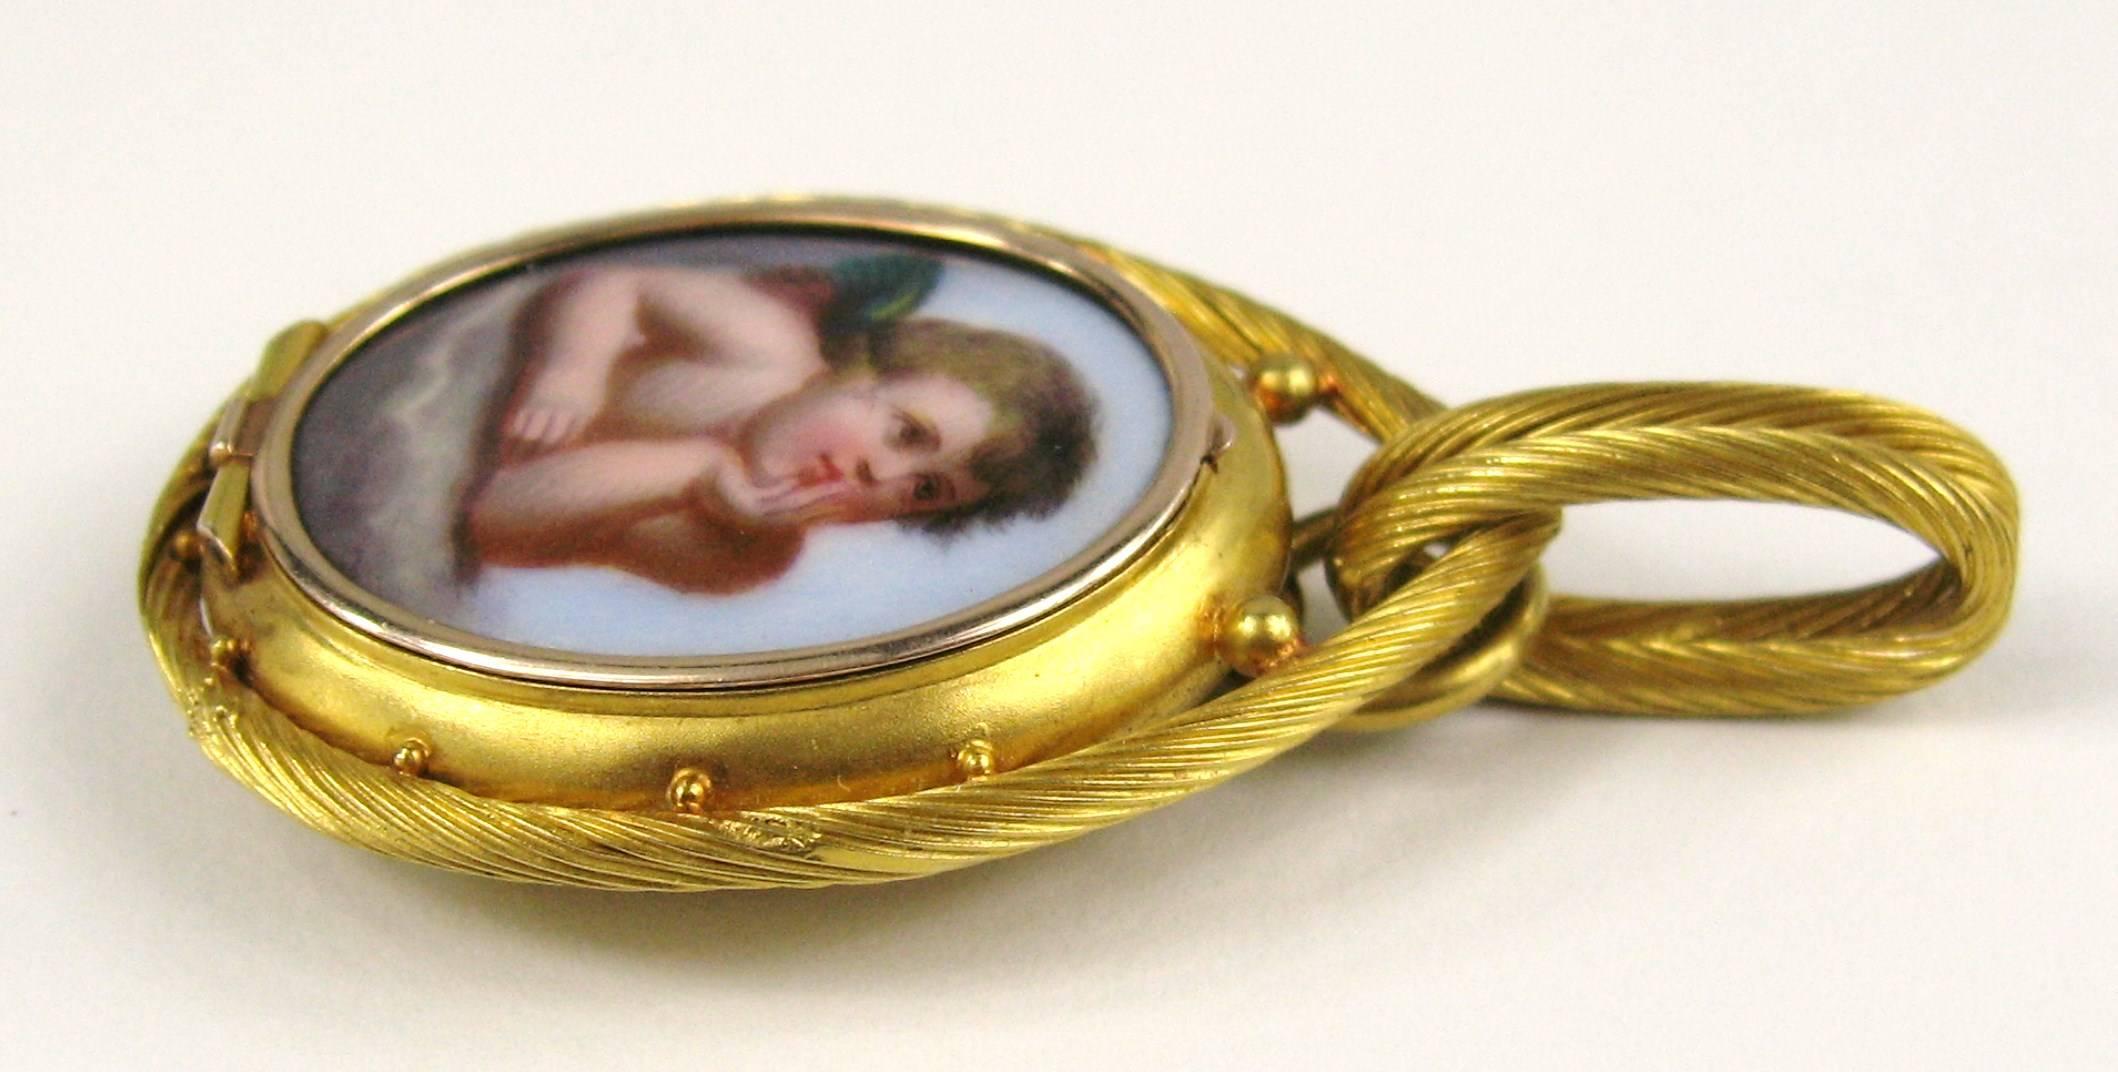 Take a look at this stunning antique locket with a cherub on the front as well as a cross on the back. The locket is 20KT Cross is 18K. Handmade beauty! 
One fine example of Antique Jewelry. The front displays the most beautiful and elegant